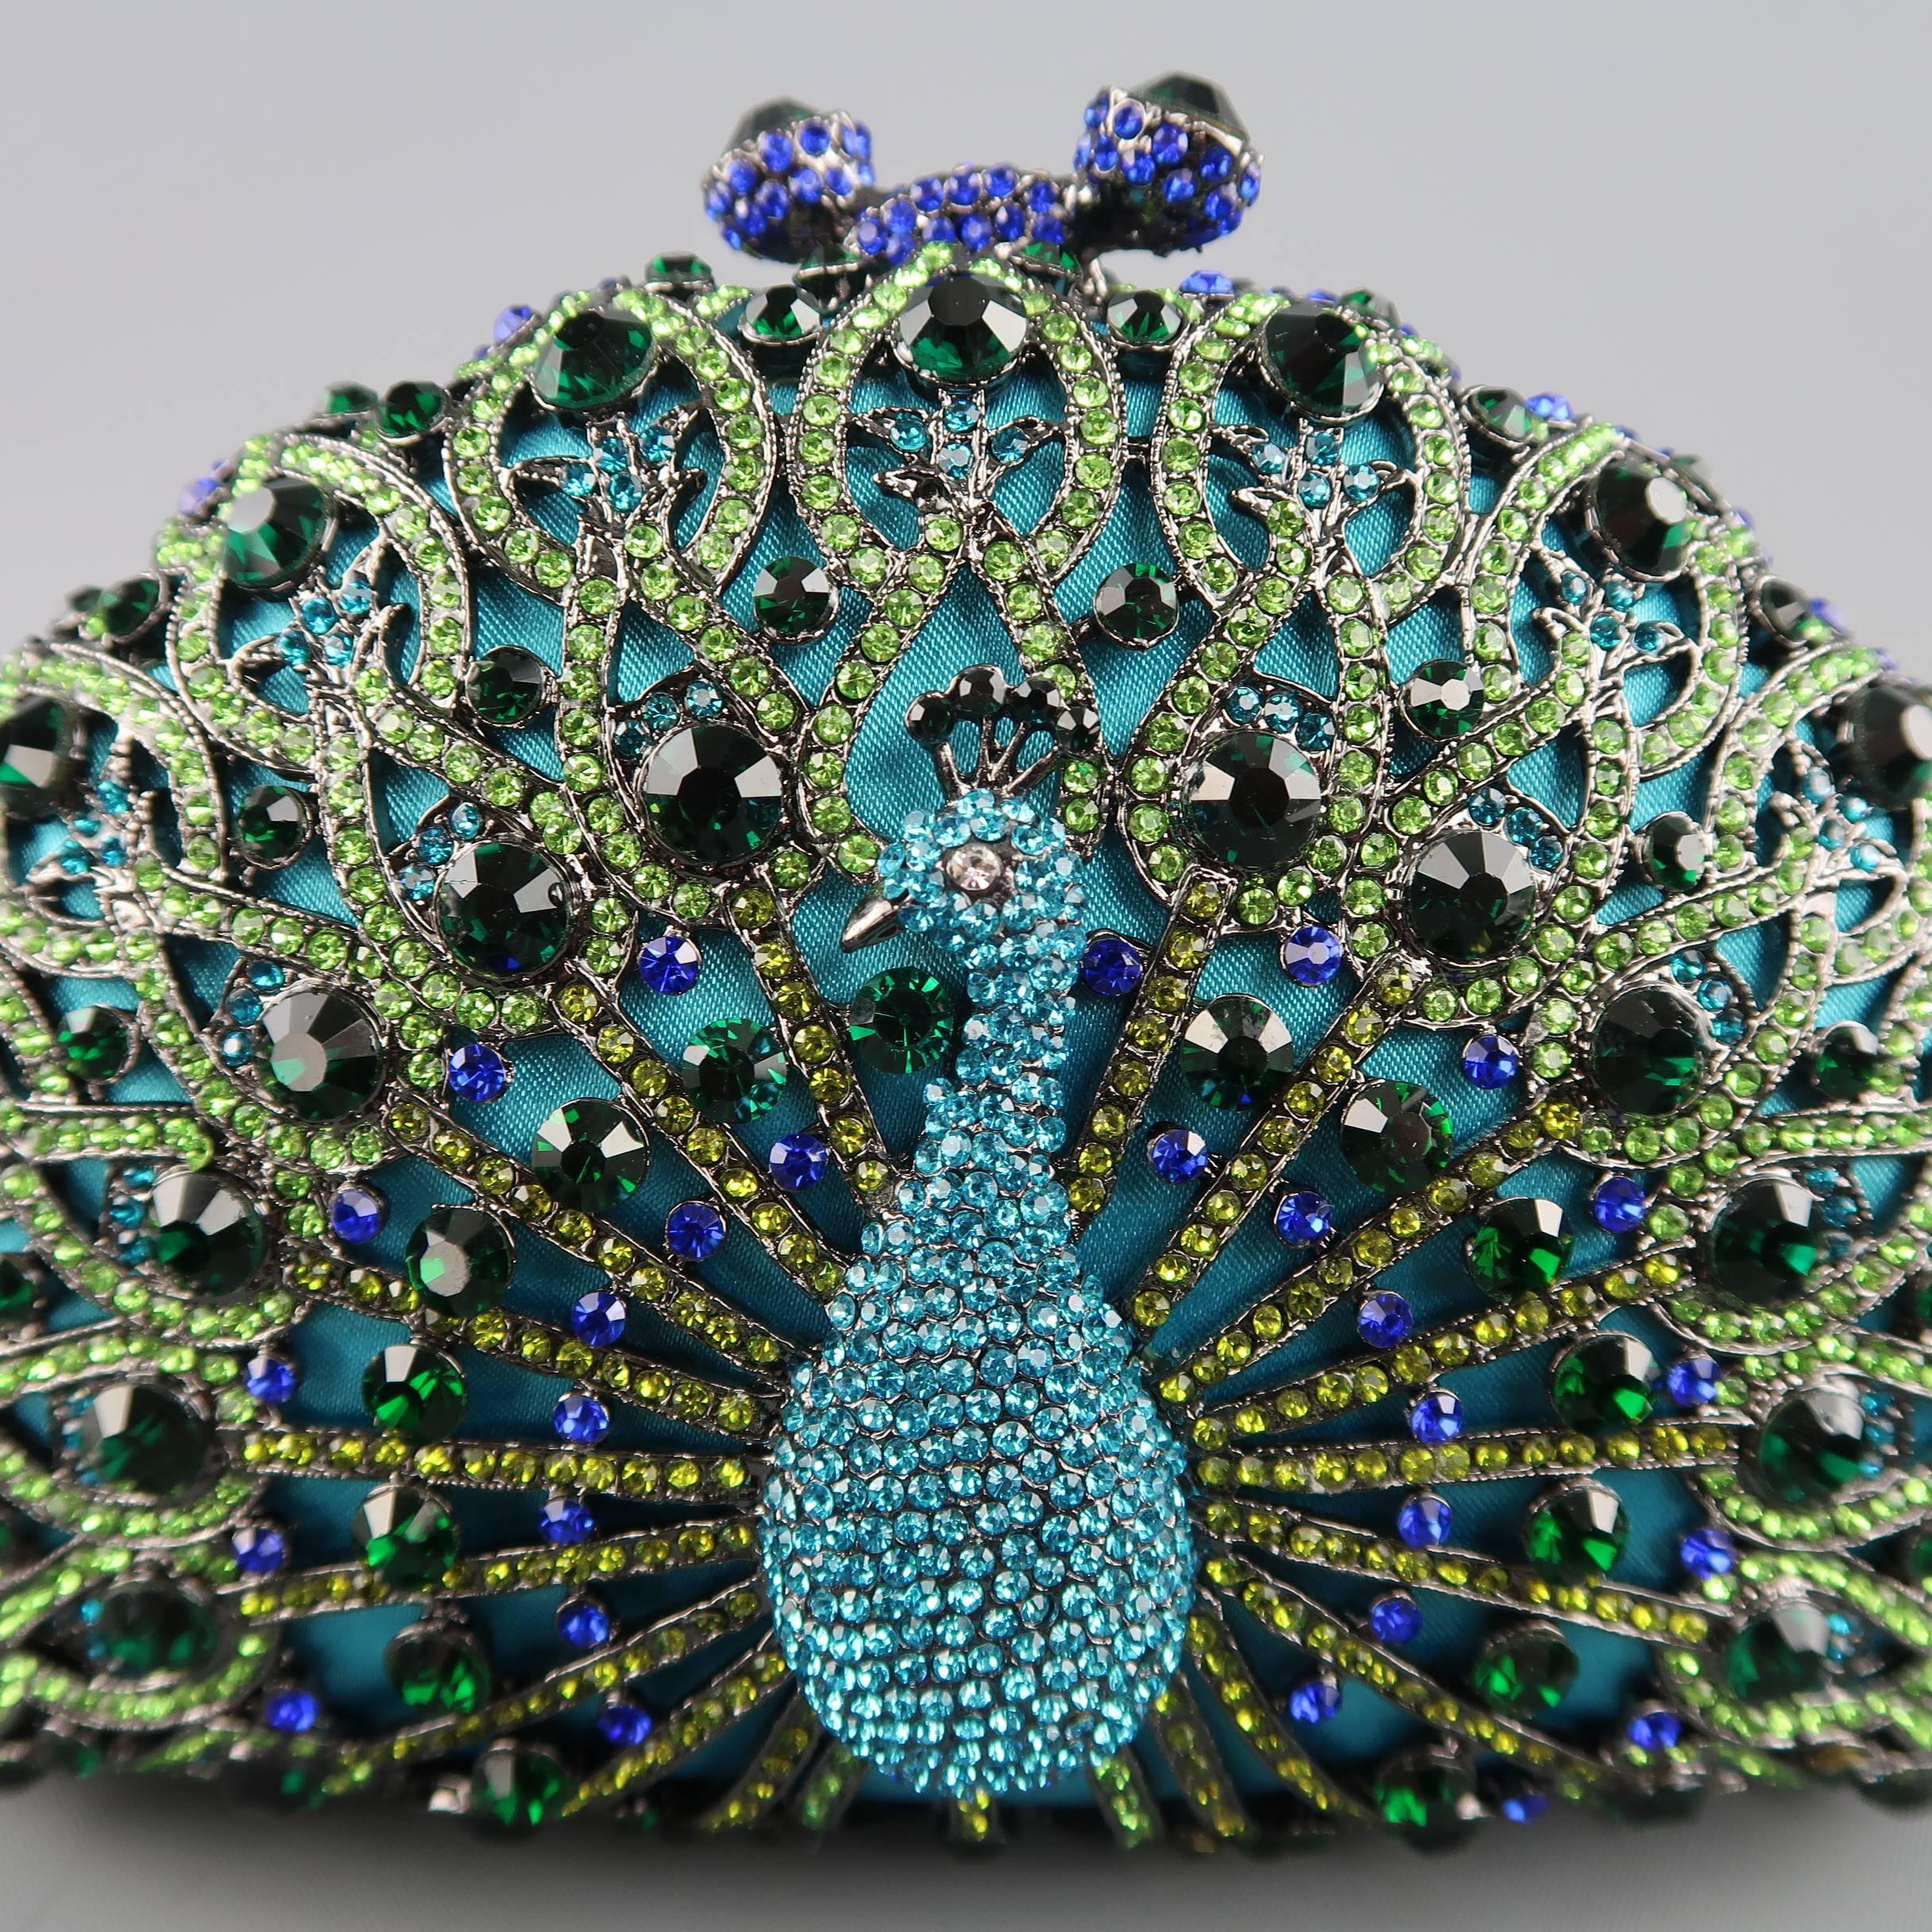 LUXMOB evening clutch comes in turquoise satin with allover metal, rhinestone encrusted peacock motif, magnetic faux kiss lock closure, and optional shoulder strap.
 
New with Tags.
 
Measurements:
 
Length: 6.5 in.
Width: 2 in.
Height: 4 in.
Drop: